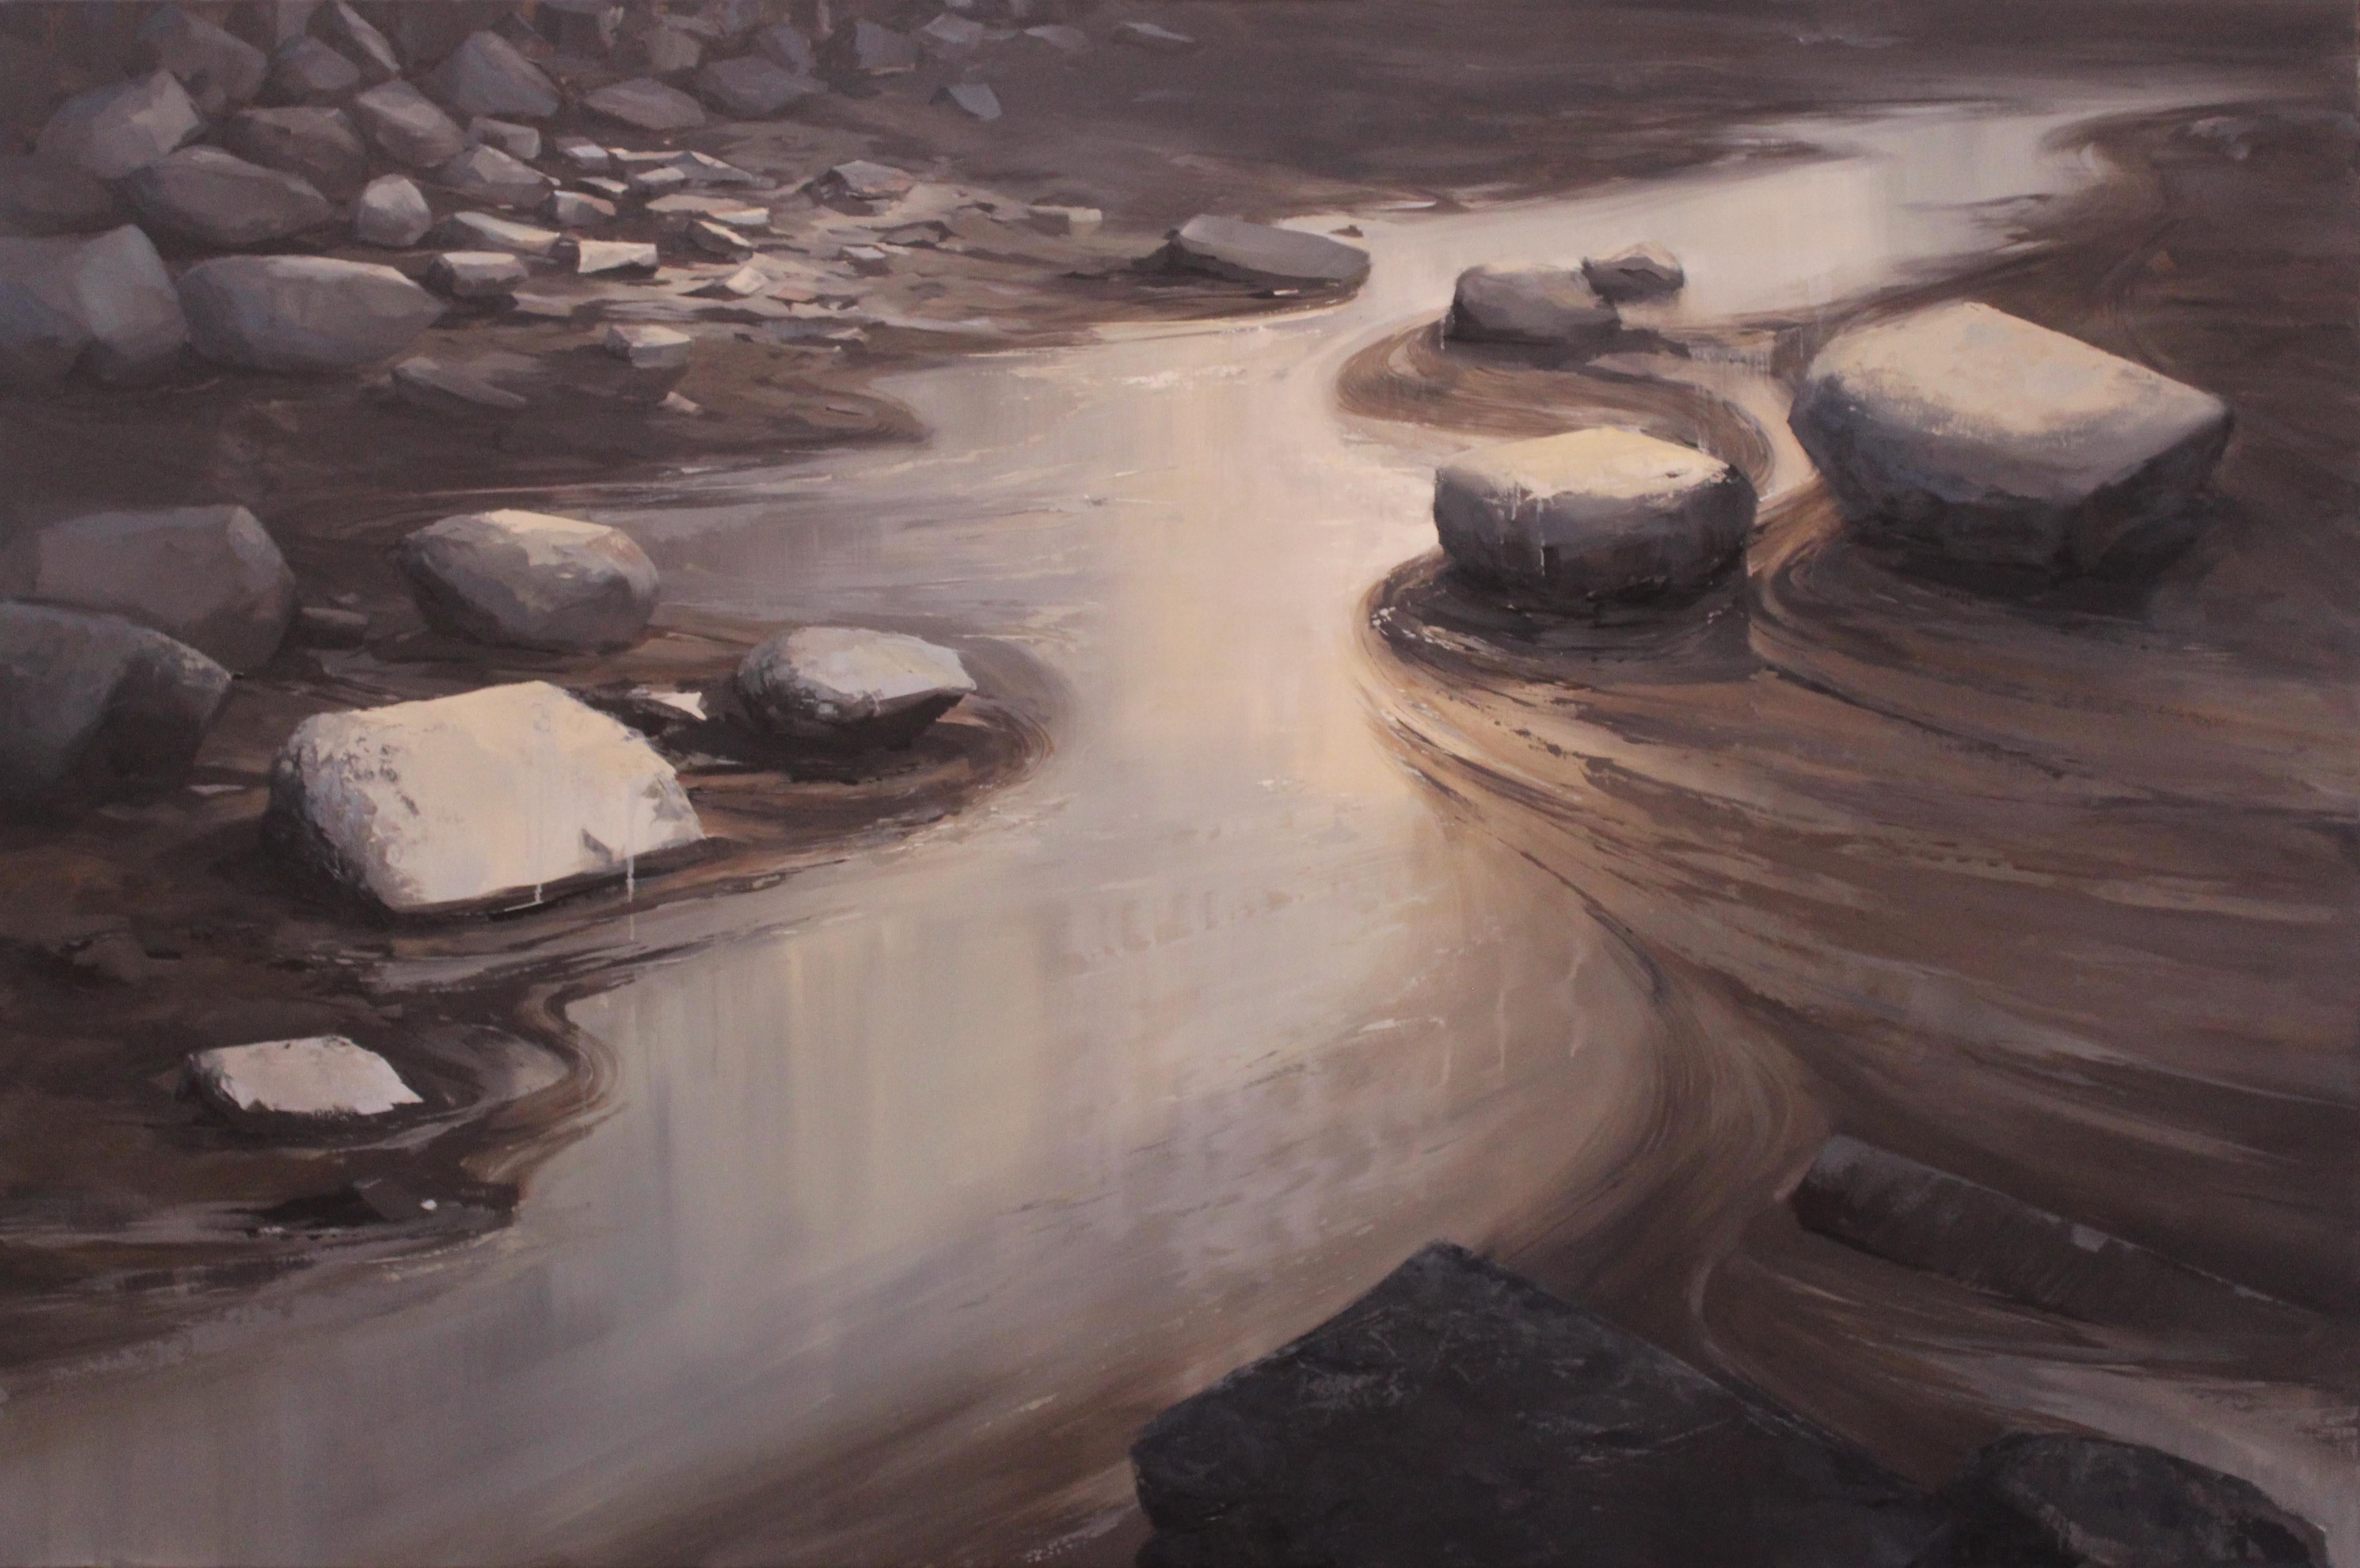 Marein Konijn Figurative Painting - River Bank - 21st Century Contemporary Oil Landscape with Water and Rocks